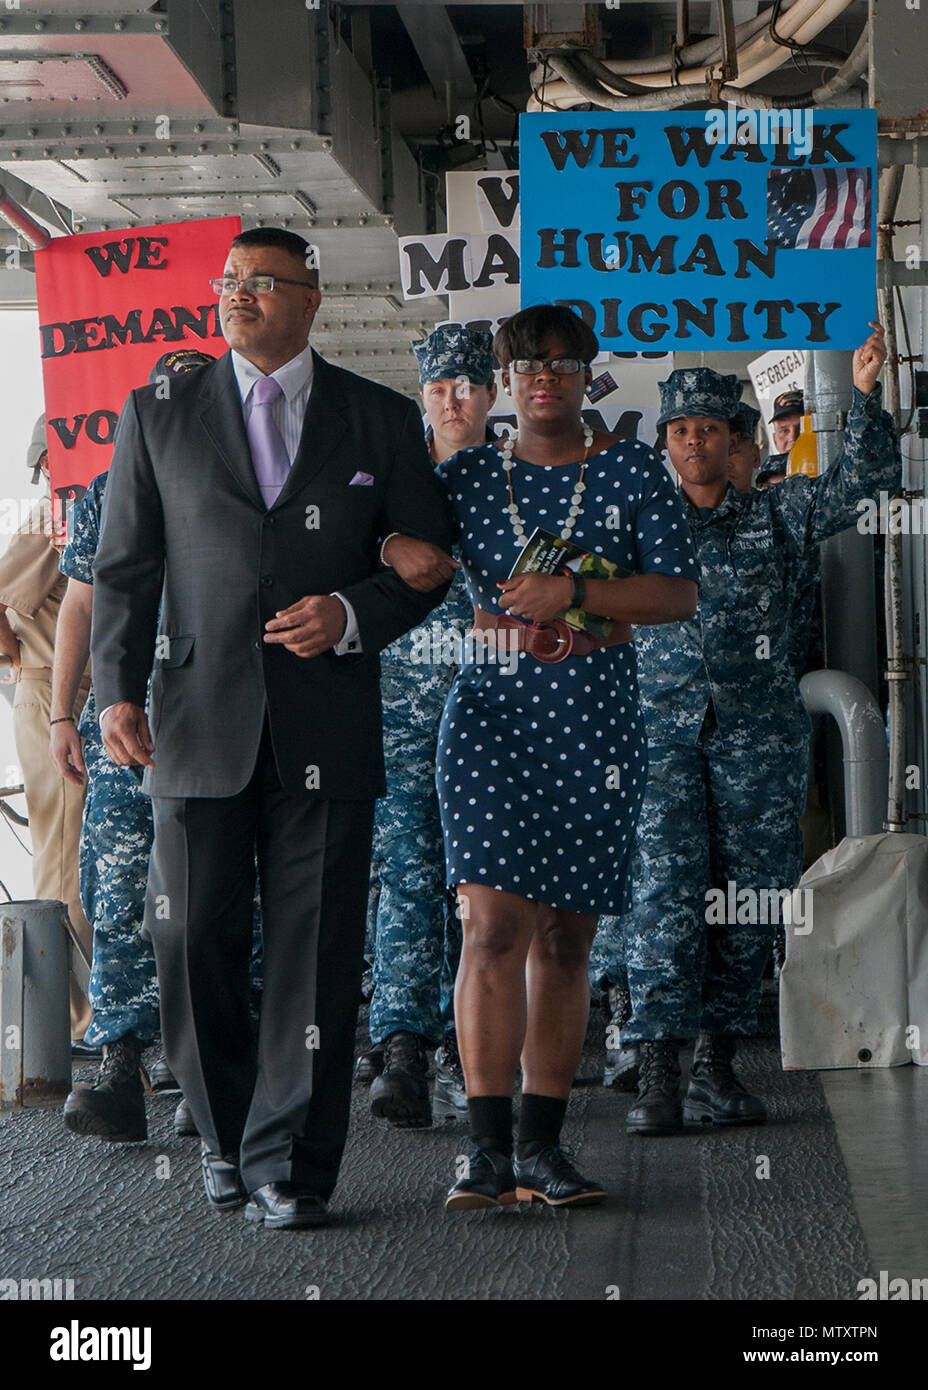 170131-N-DS883-009    SANTA RITA, Guam (Jan. 31, 2017) Senior Chief Operations Specialist Charles Green and Machinist Mate 1st Class Ashley Johnson, assigned to the submarine tender USS Frank Cable (AS 40), lead Sailors during a march honoring Dr. Martin Luther King Jr. aboard the ship, Jan. 31. The ship’s diversity committee held the event to reenact the1965 Selma-to-Montgomery March for voting rights led by Martin Luther King Jr.’s Southern Christian Leadership Conference. (U.S. Navy photo by Mass Communication Specialist Seaman Heather C. Wamsley/Released) Stock Photo